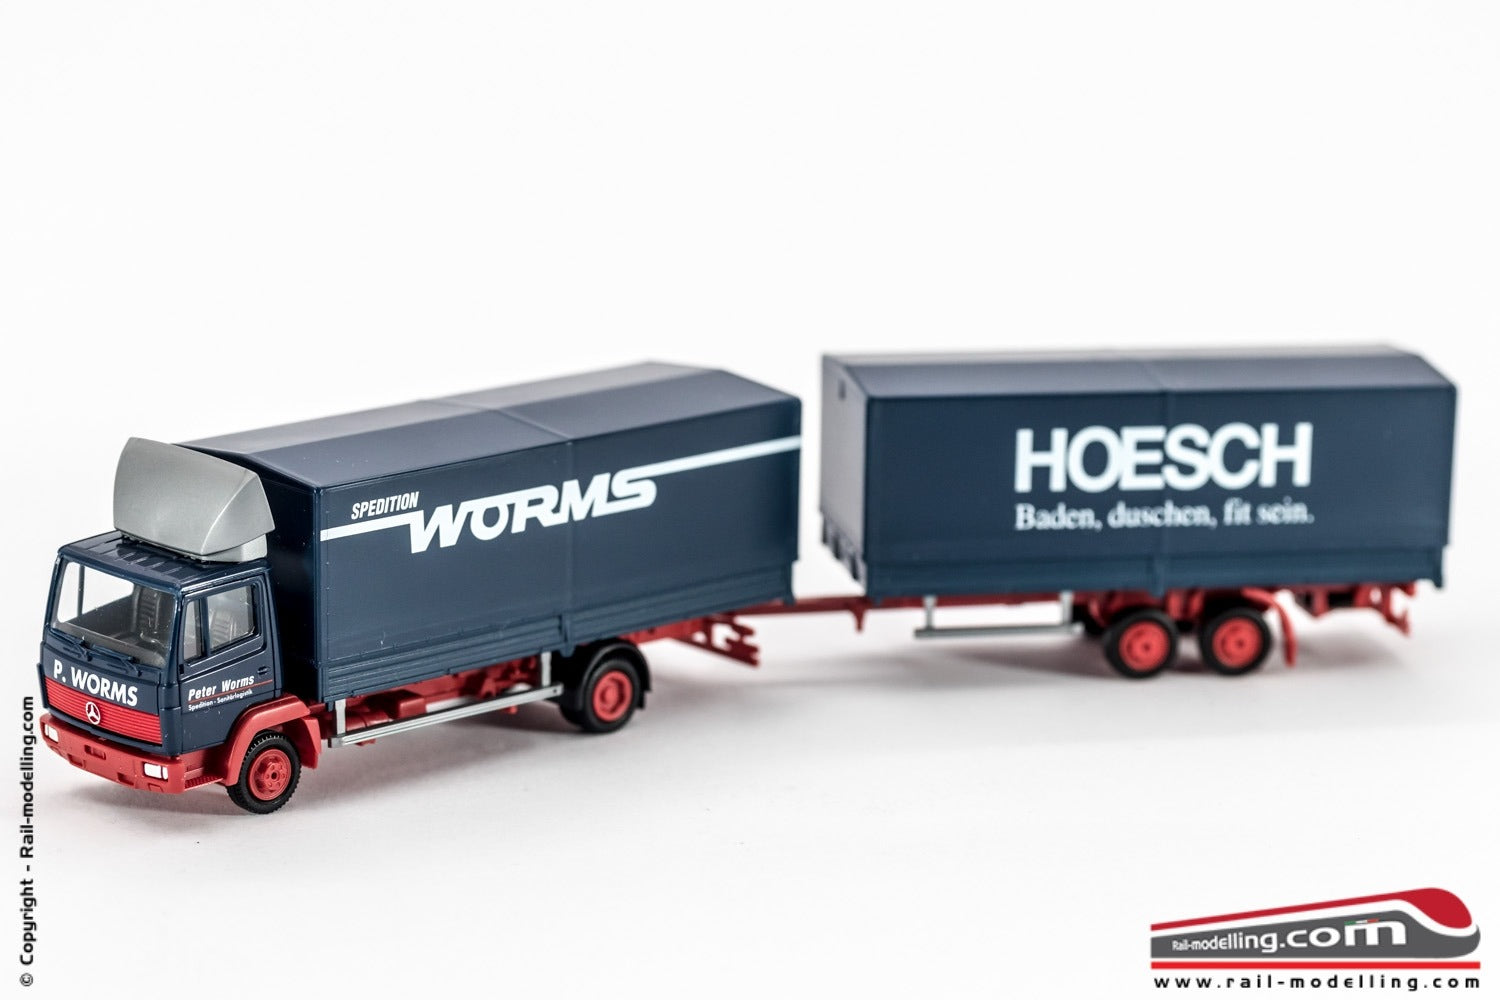 HERPA 144735 - H0 1:87 - Camion rimorchio Merceded Benz 814 Corriere Worms